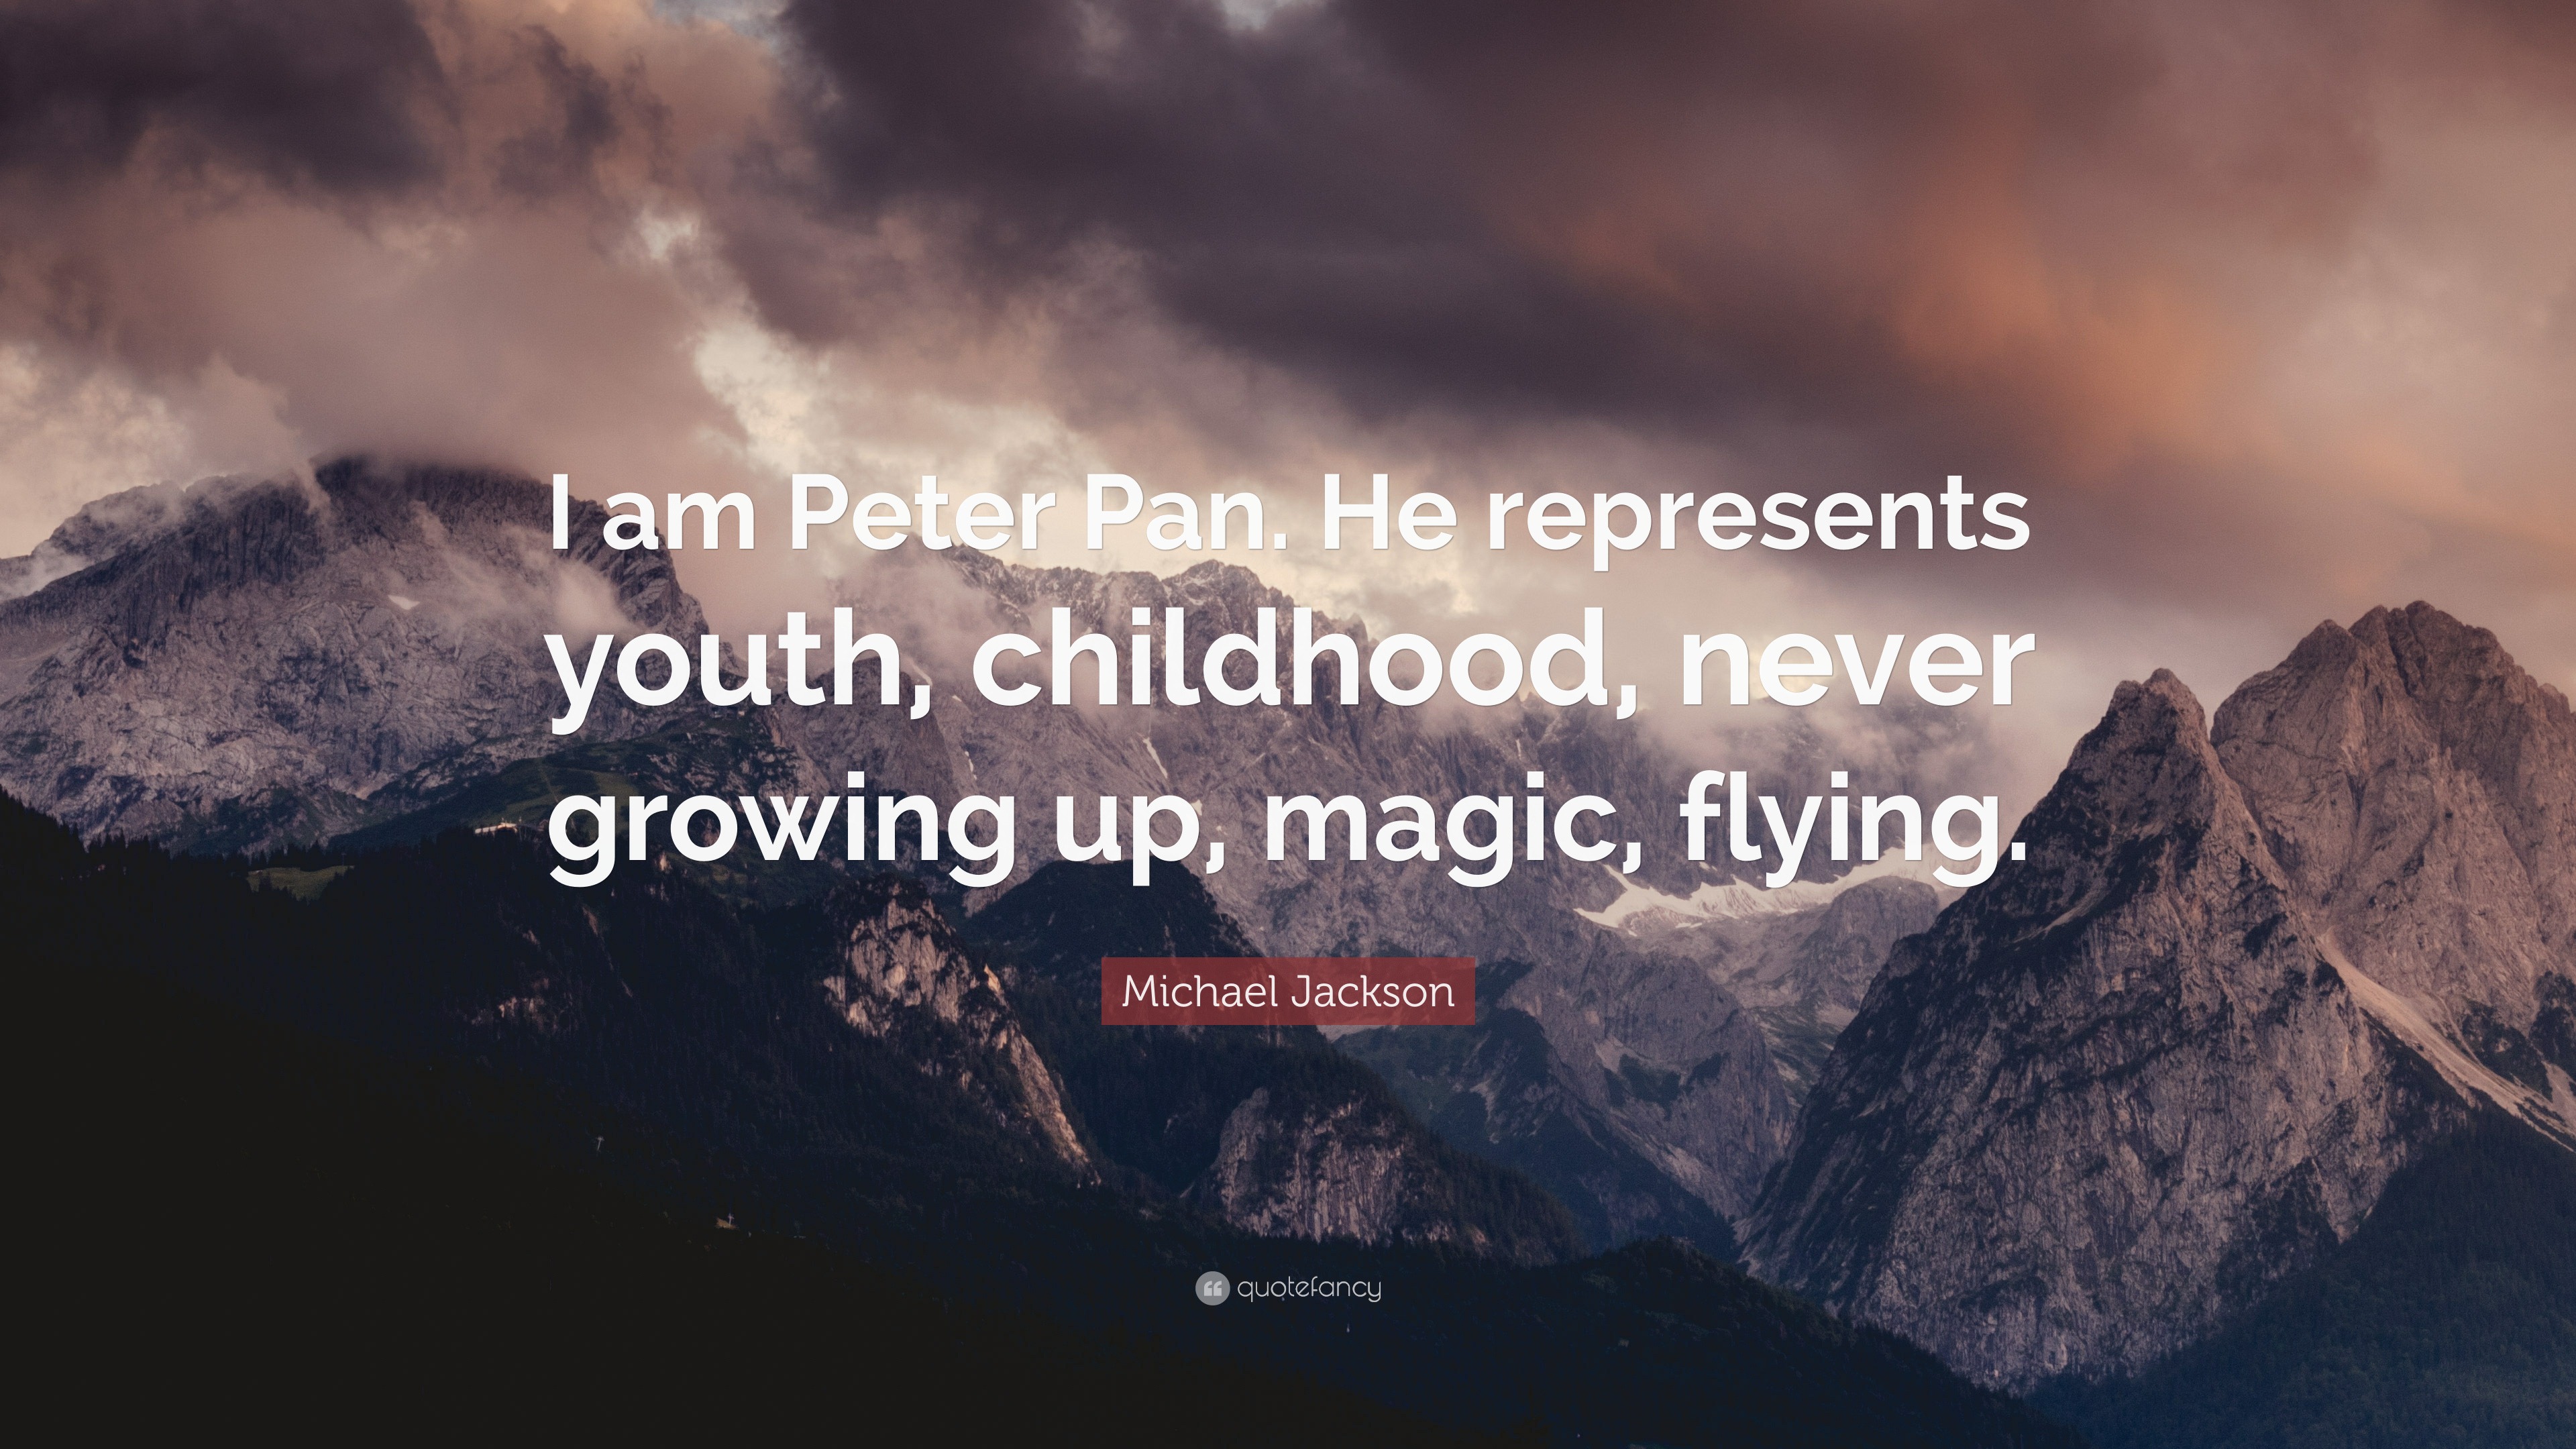 Michael Jackson Quote Peter Pan A4 poster print 